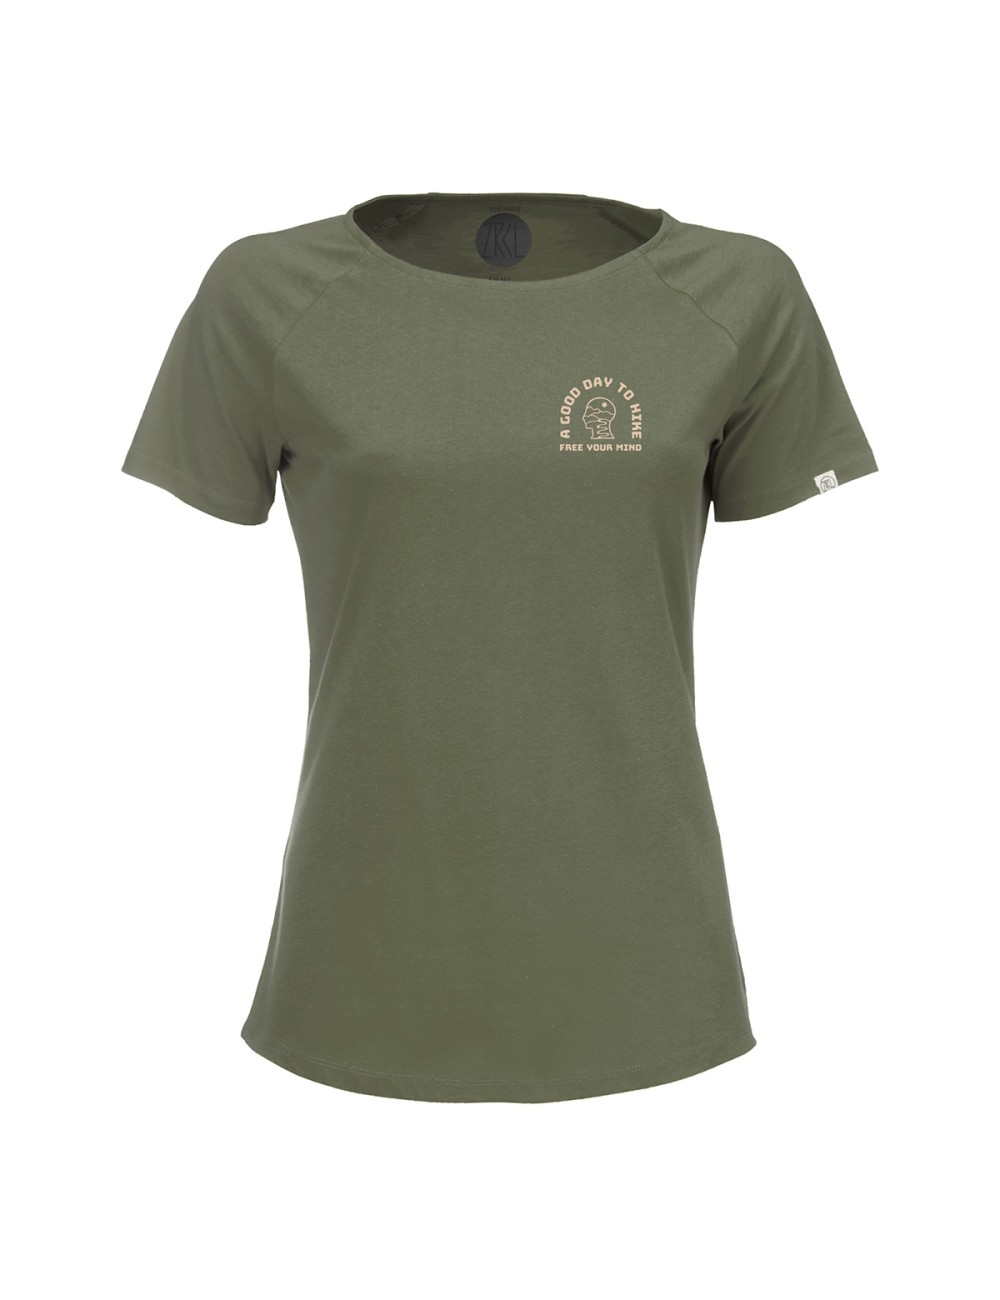 ZRCL Wms T-Shirt Hike - Olive